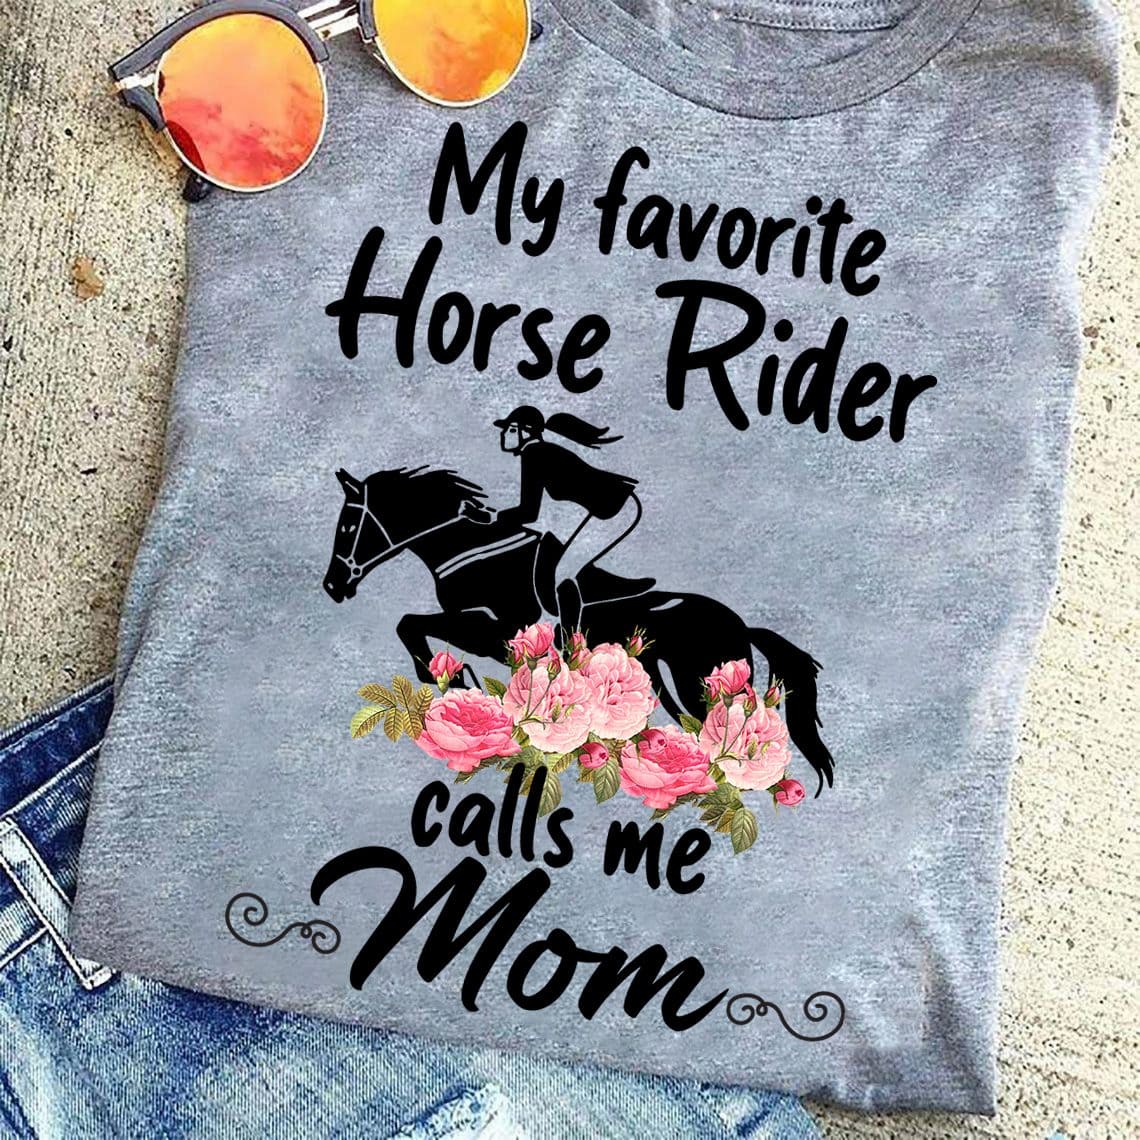 My favorite horse rider calls me mom - Mother's day gift, barrel racing daughter